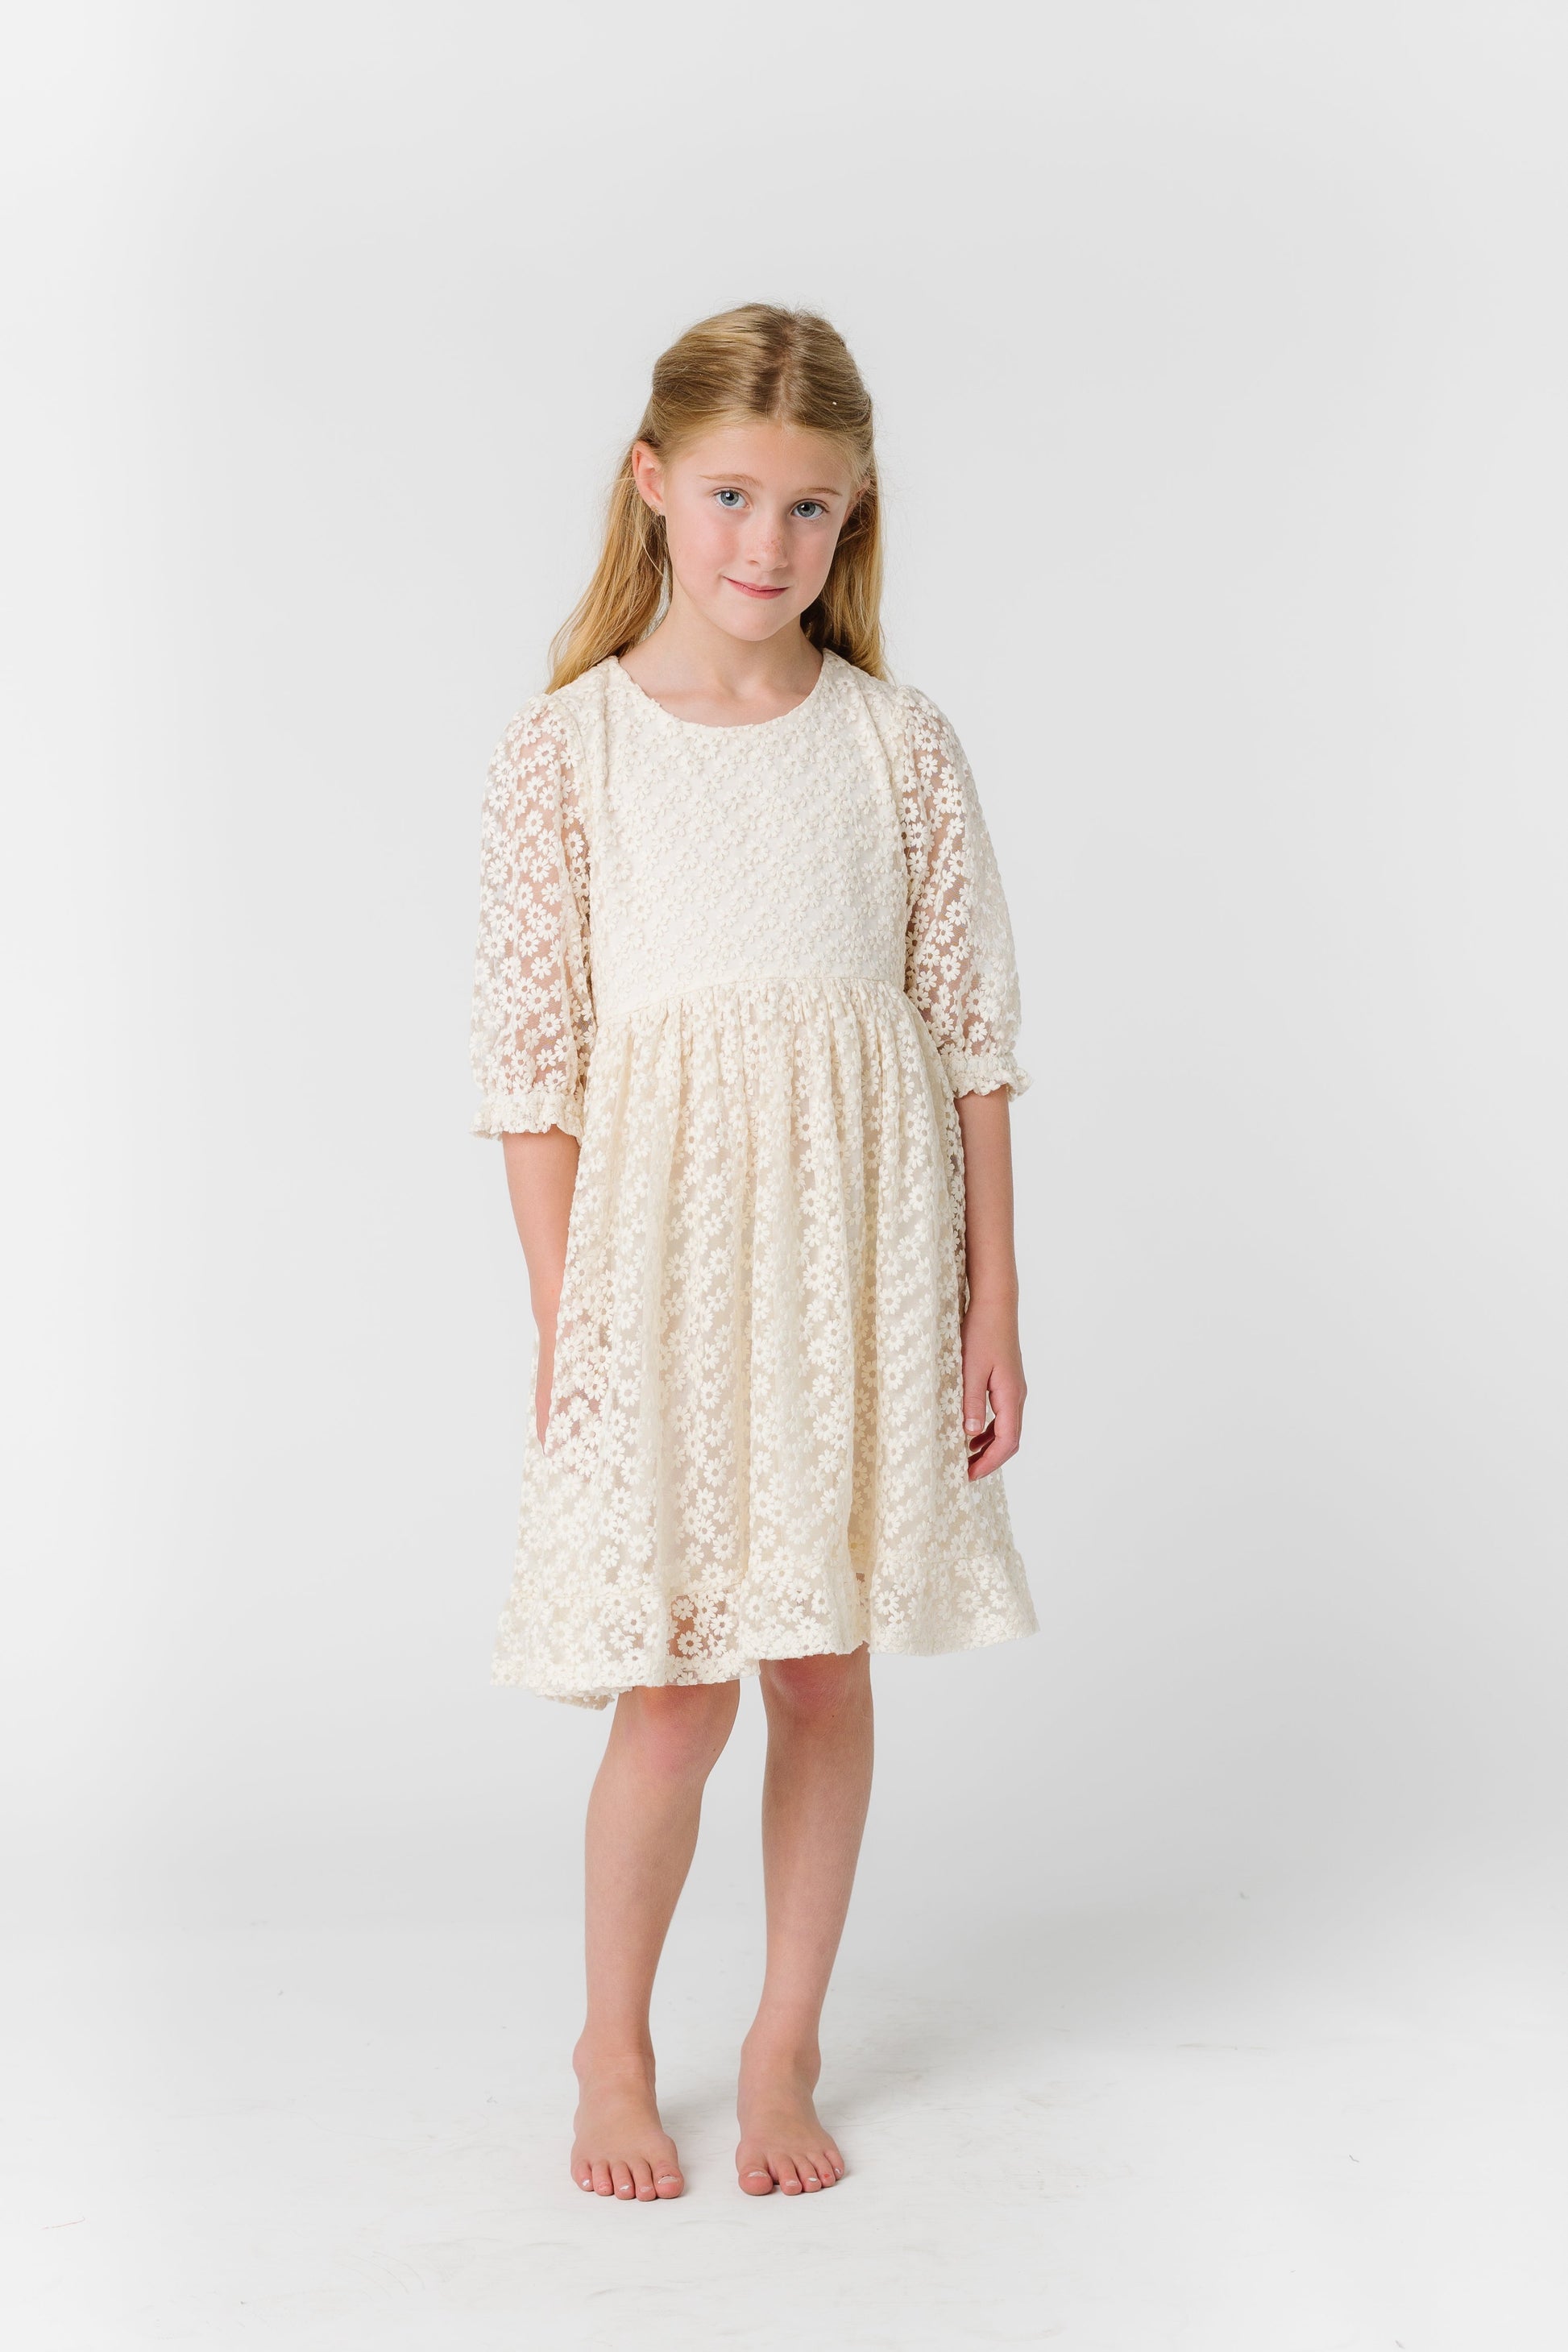 Brass & Roe It's Your Day Lace Girl's Dress